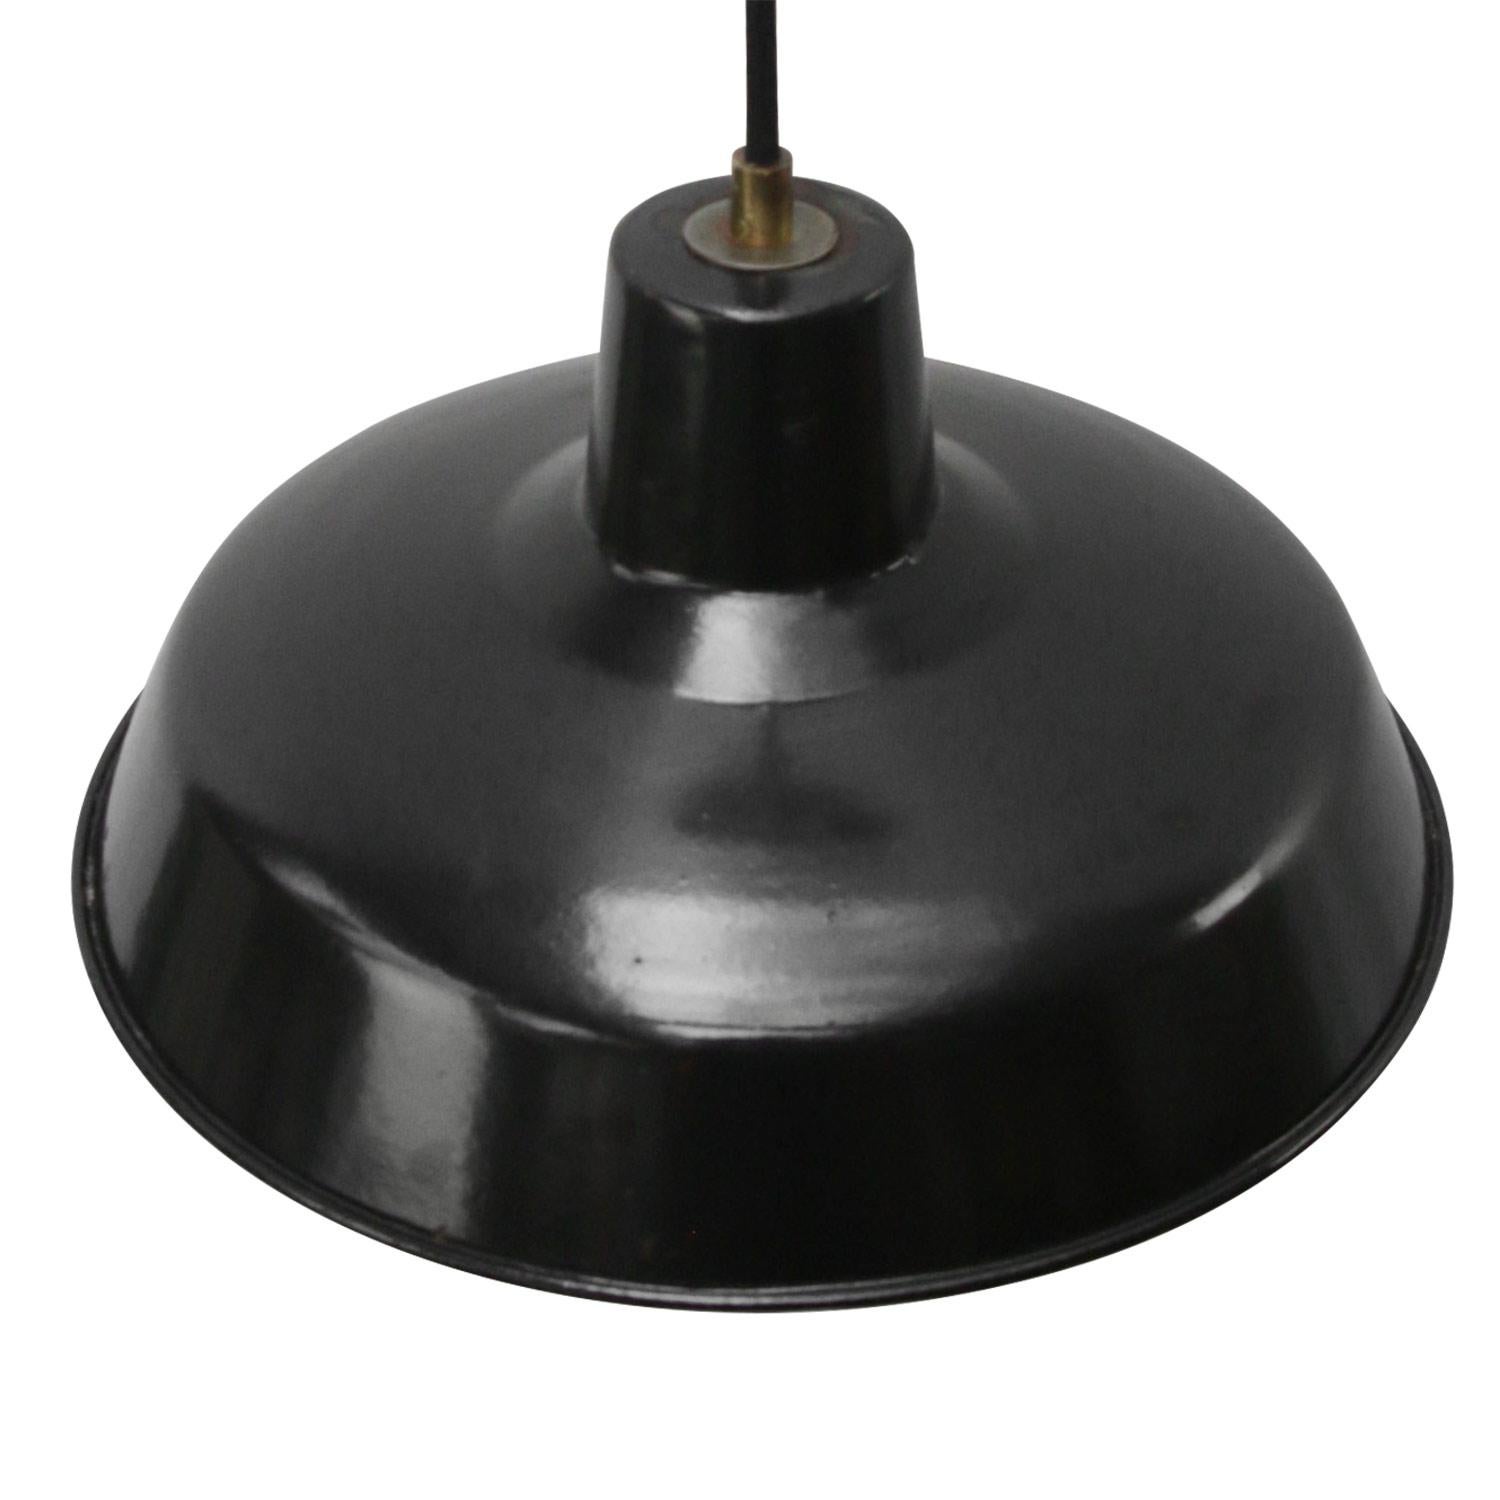 Black industrial pendant. 
Black enamel with white type, white interior

Weight: 0.70 kg / 1.5 lb

Priced per individual item. All lamps have been made suitable by international standards for incandescent light bulbs, energy-efficient and LED